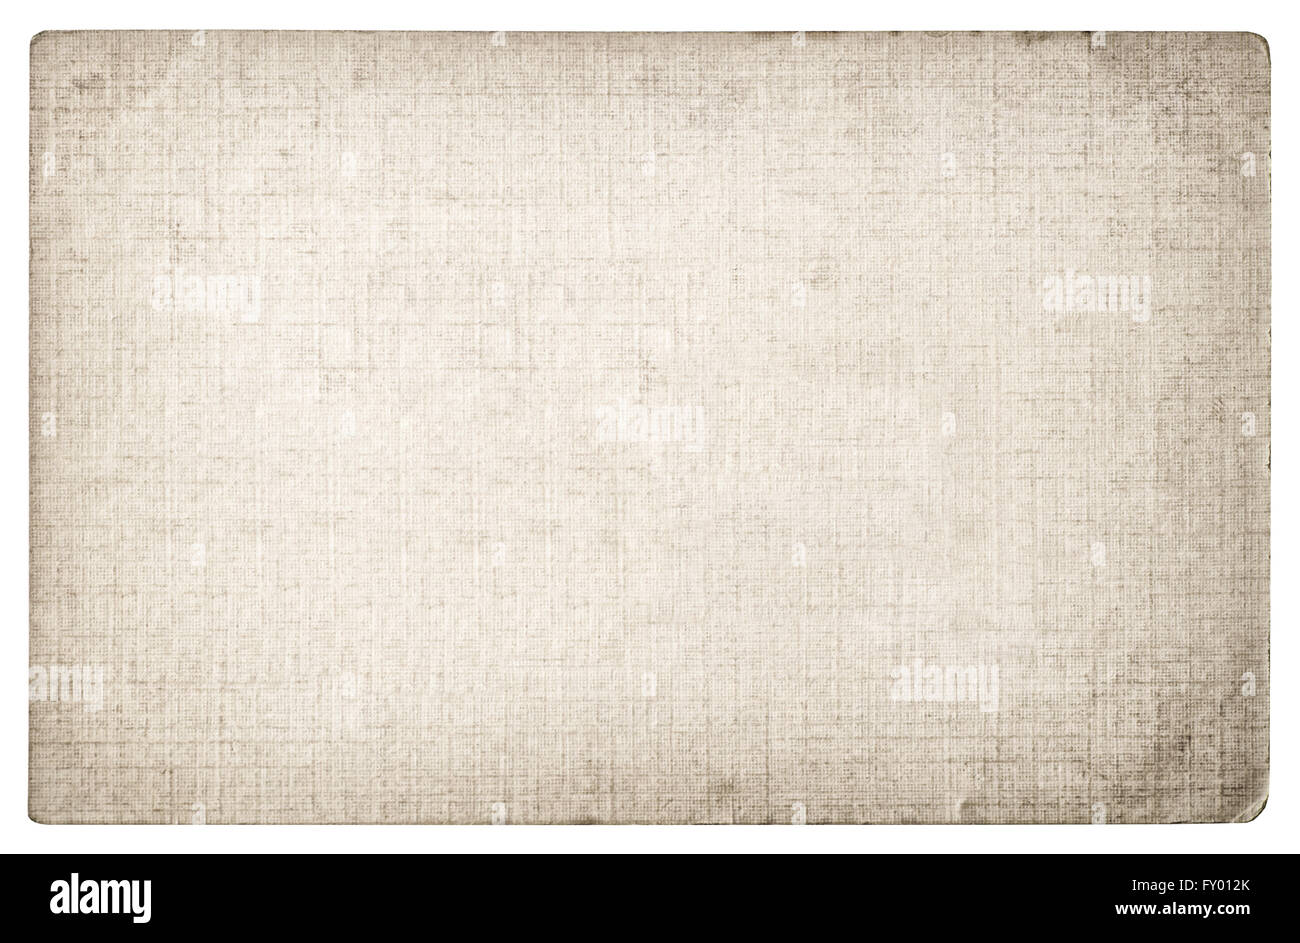 Grungy textured paper background. Cardboard with edges Stock Photo